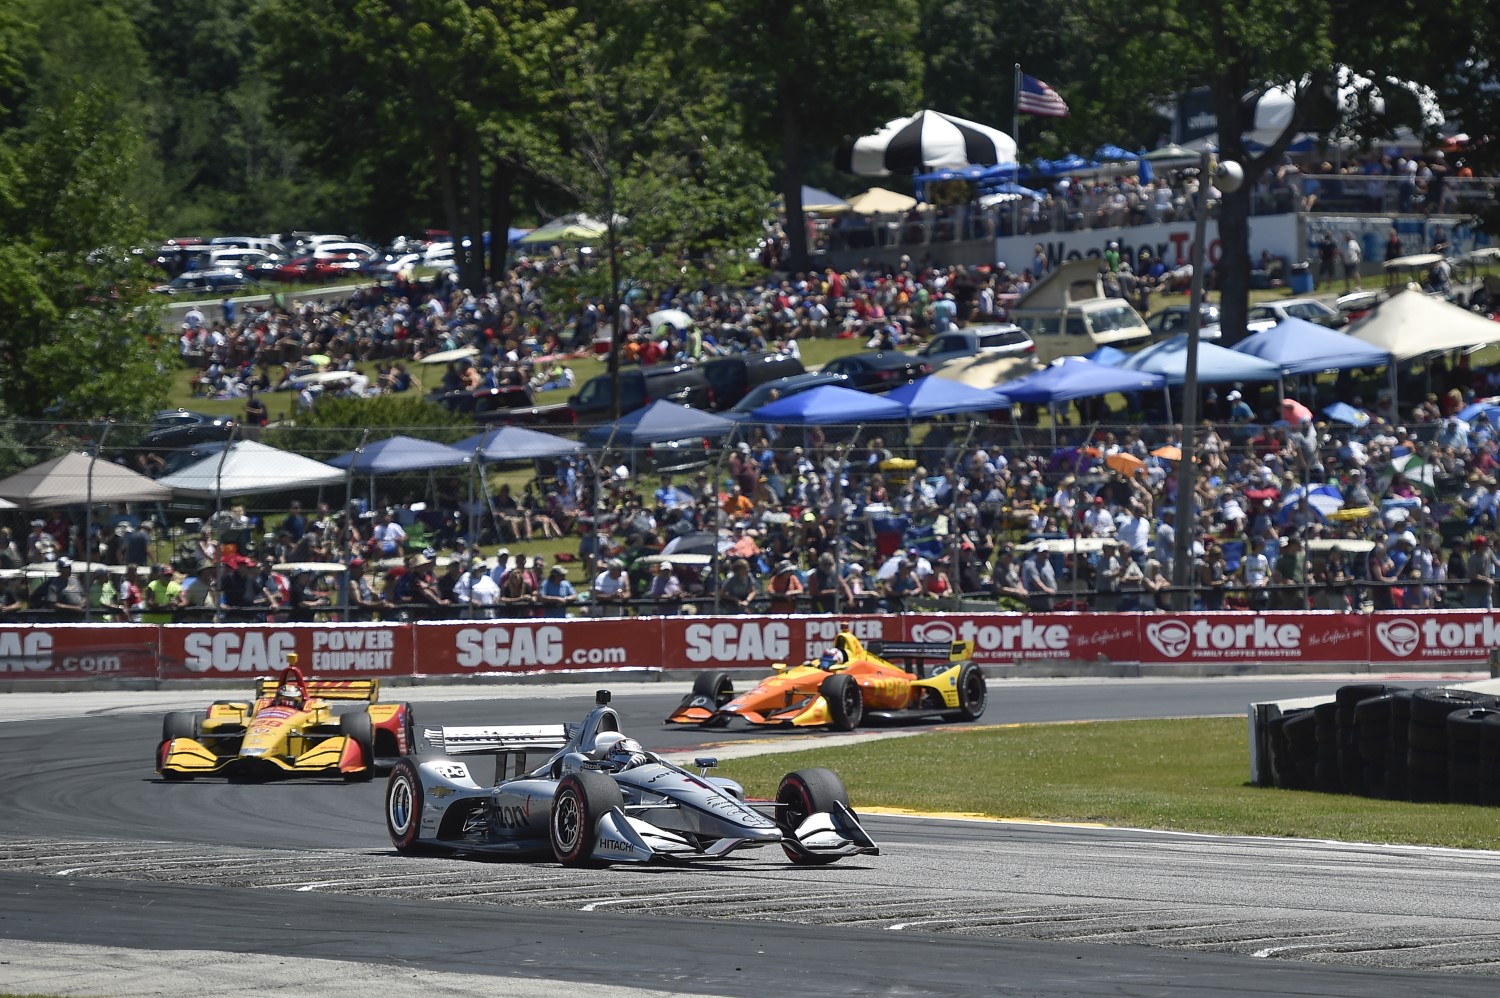 Compared to most of the oval races on the IndyCar schedule, Road America draws a big crowd. Why did the series not race at this track for so many years?